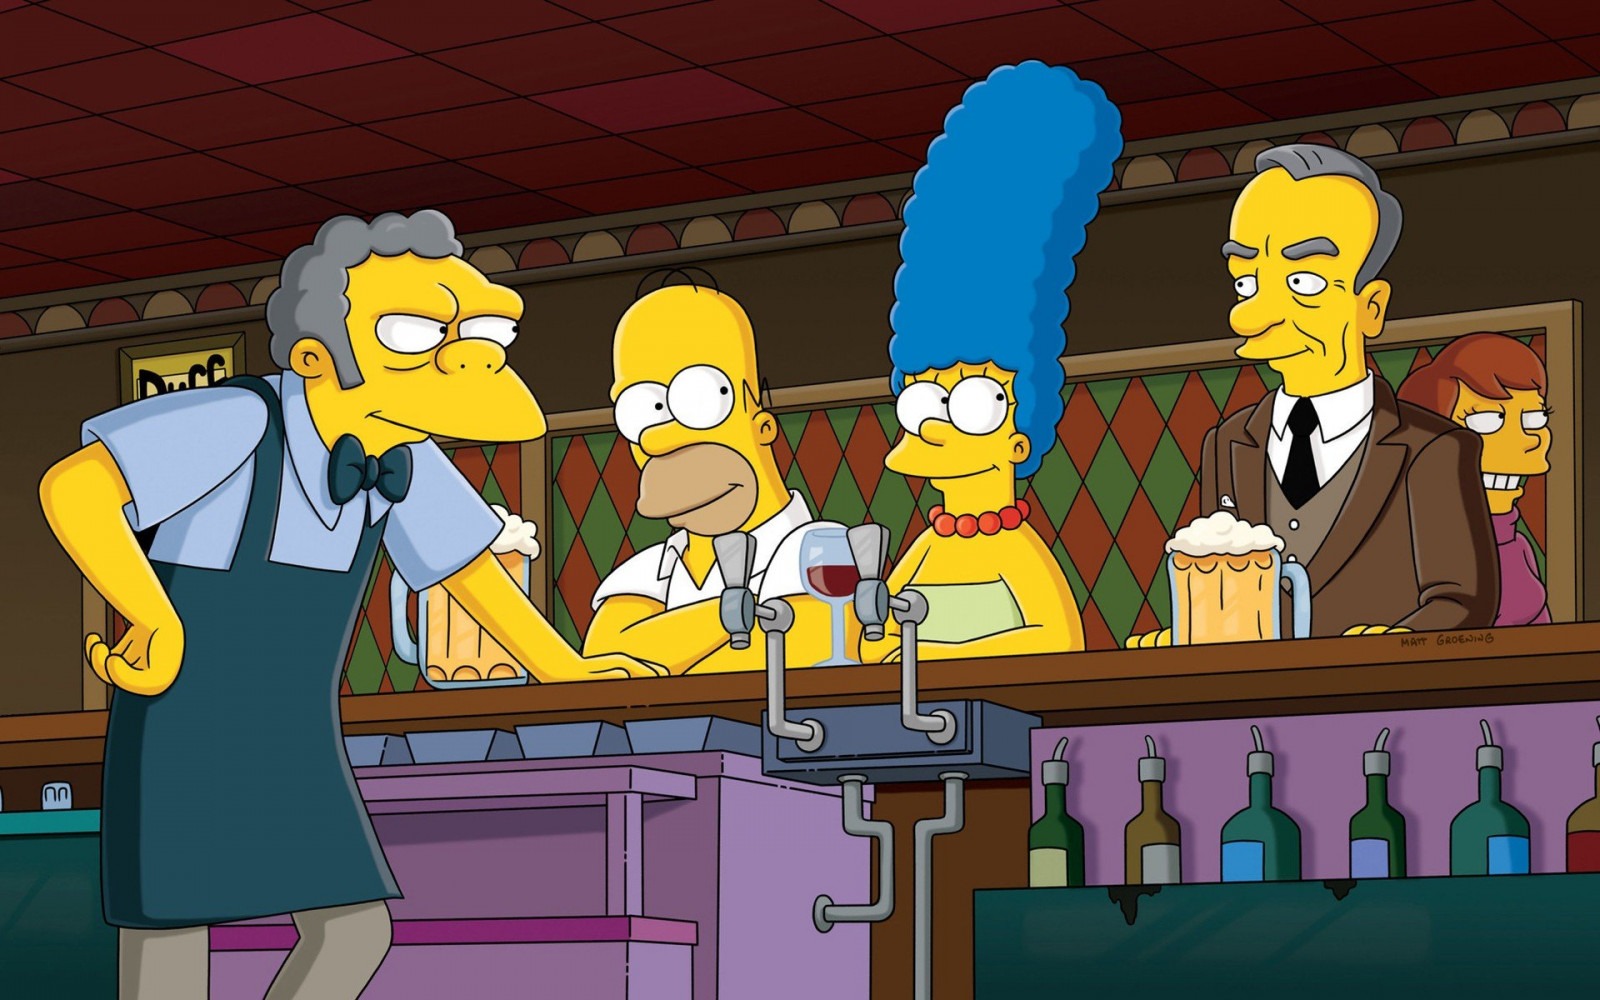 Can You *Actually* Score at Least 83% On This All-Rounded Knowledge Quiz? Moe Szyslak, Moe's Bar From The Simpsons